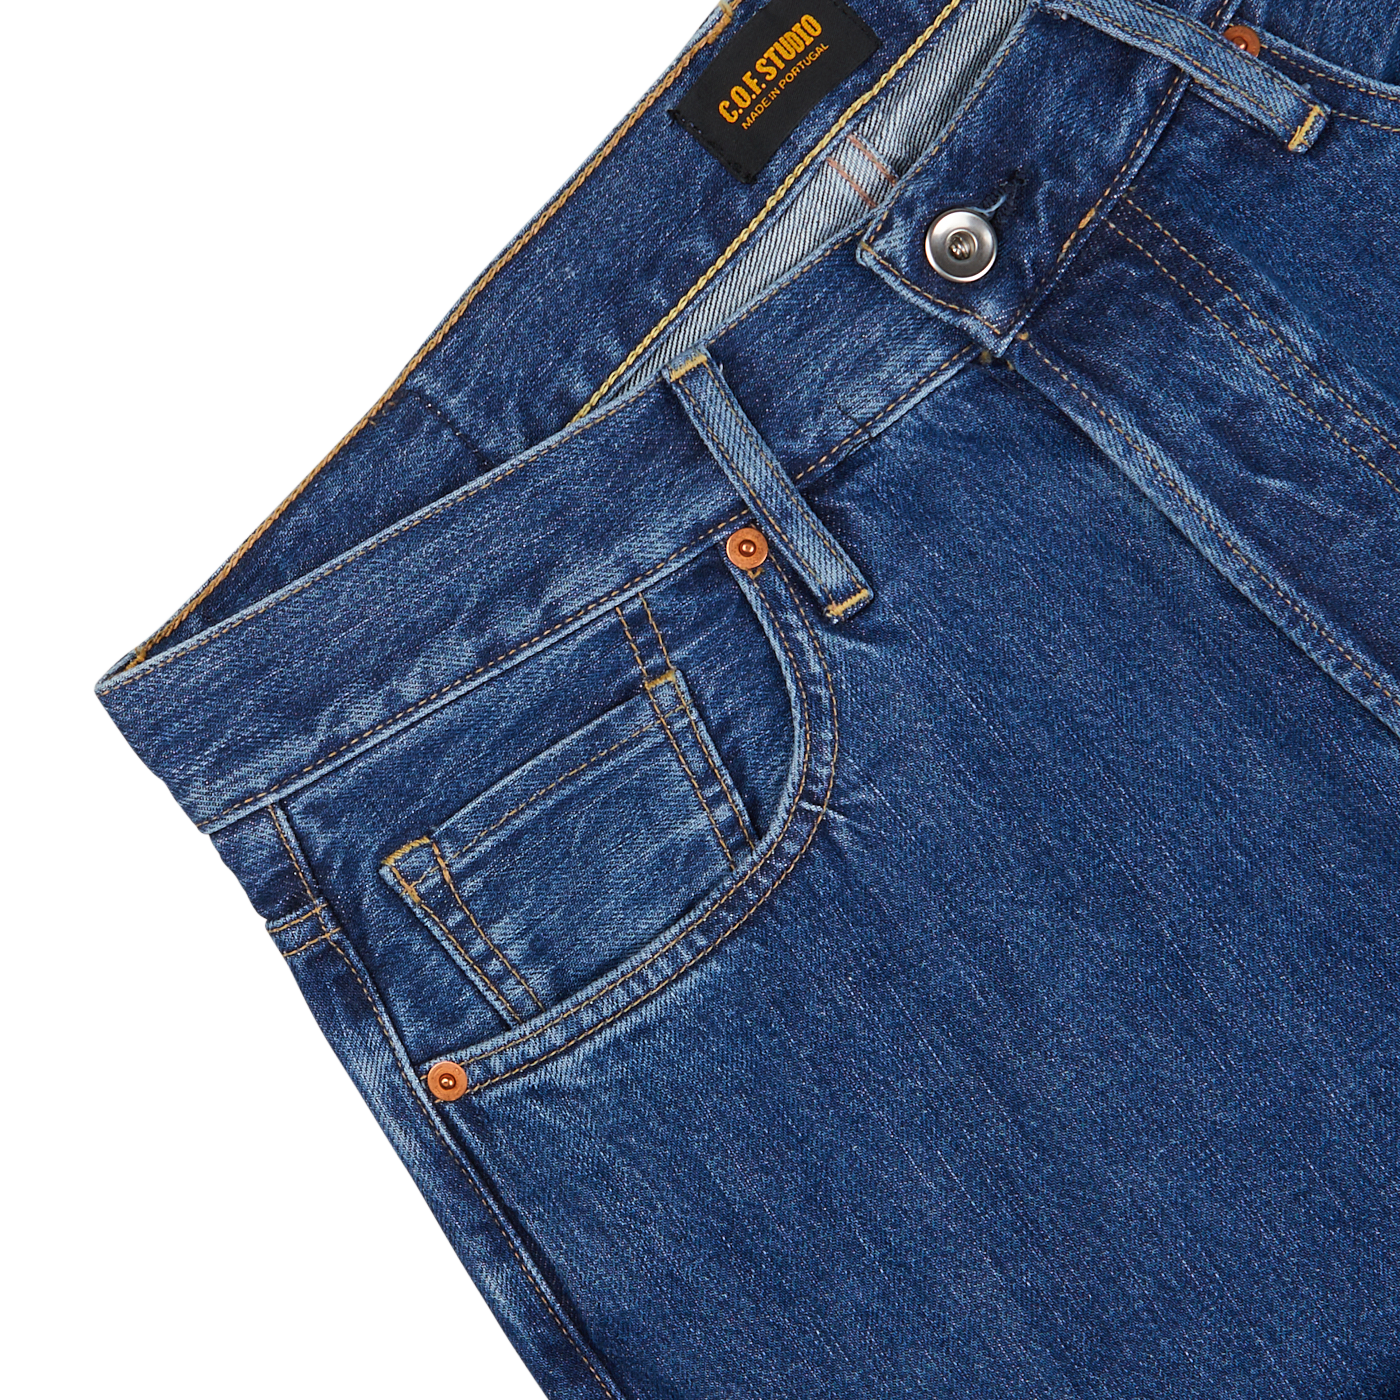 Close-up of washed Blue Organic Kurioki Cotton M7 6x Wash Jeans made by C.O.F Studio, displaying the front pocket, waistband, and button details against a neutral background.